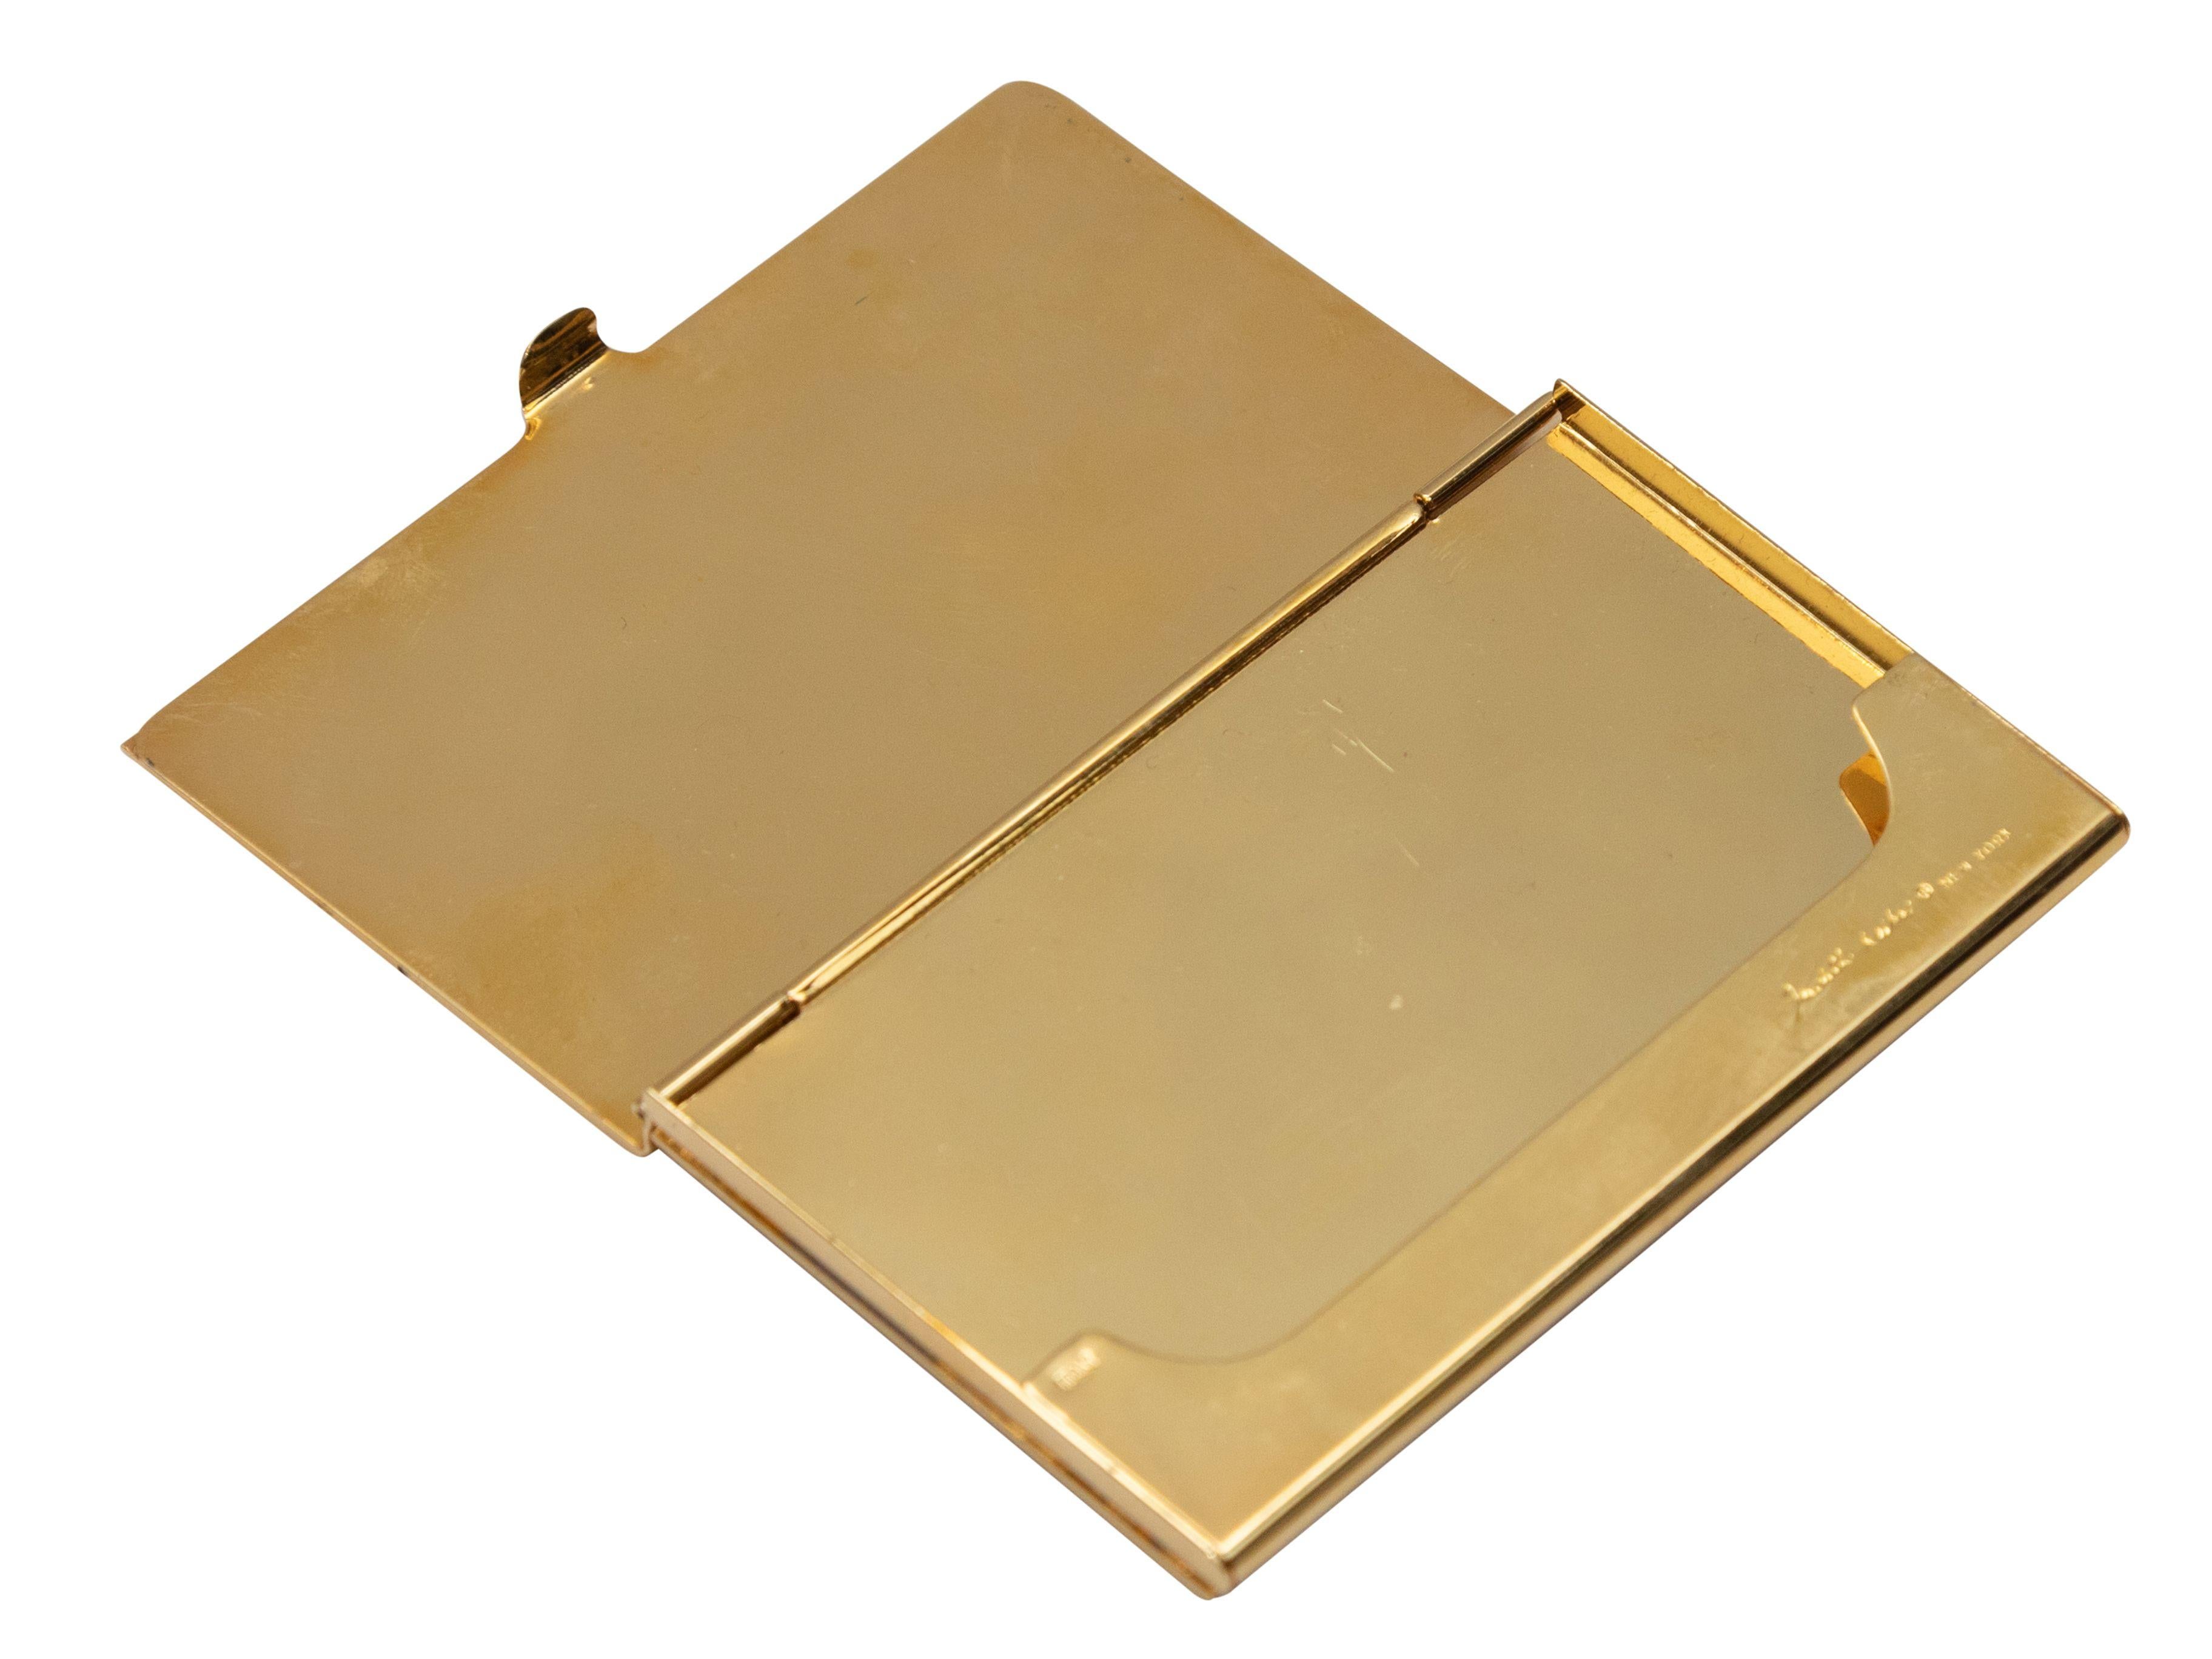 Product Details: Cocoa rhinestone and gold-tone metal card case by Judith Leiber. Bottom push closure. 2.25